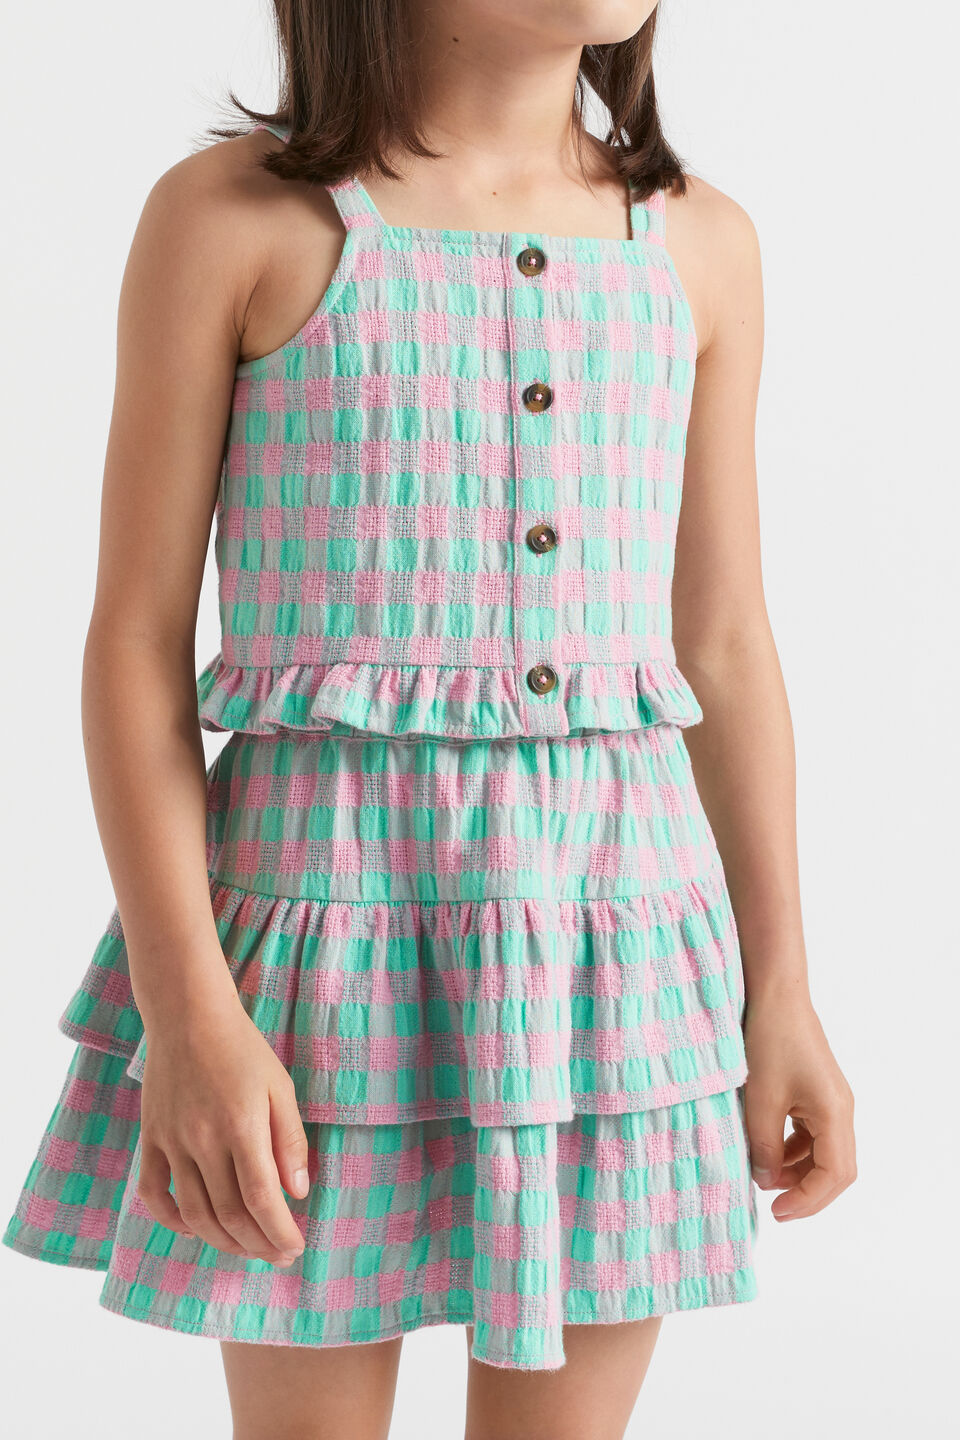 Gingham Skirt  Candy Pink